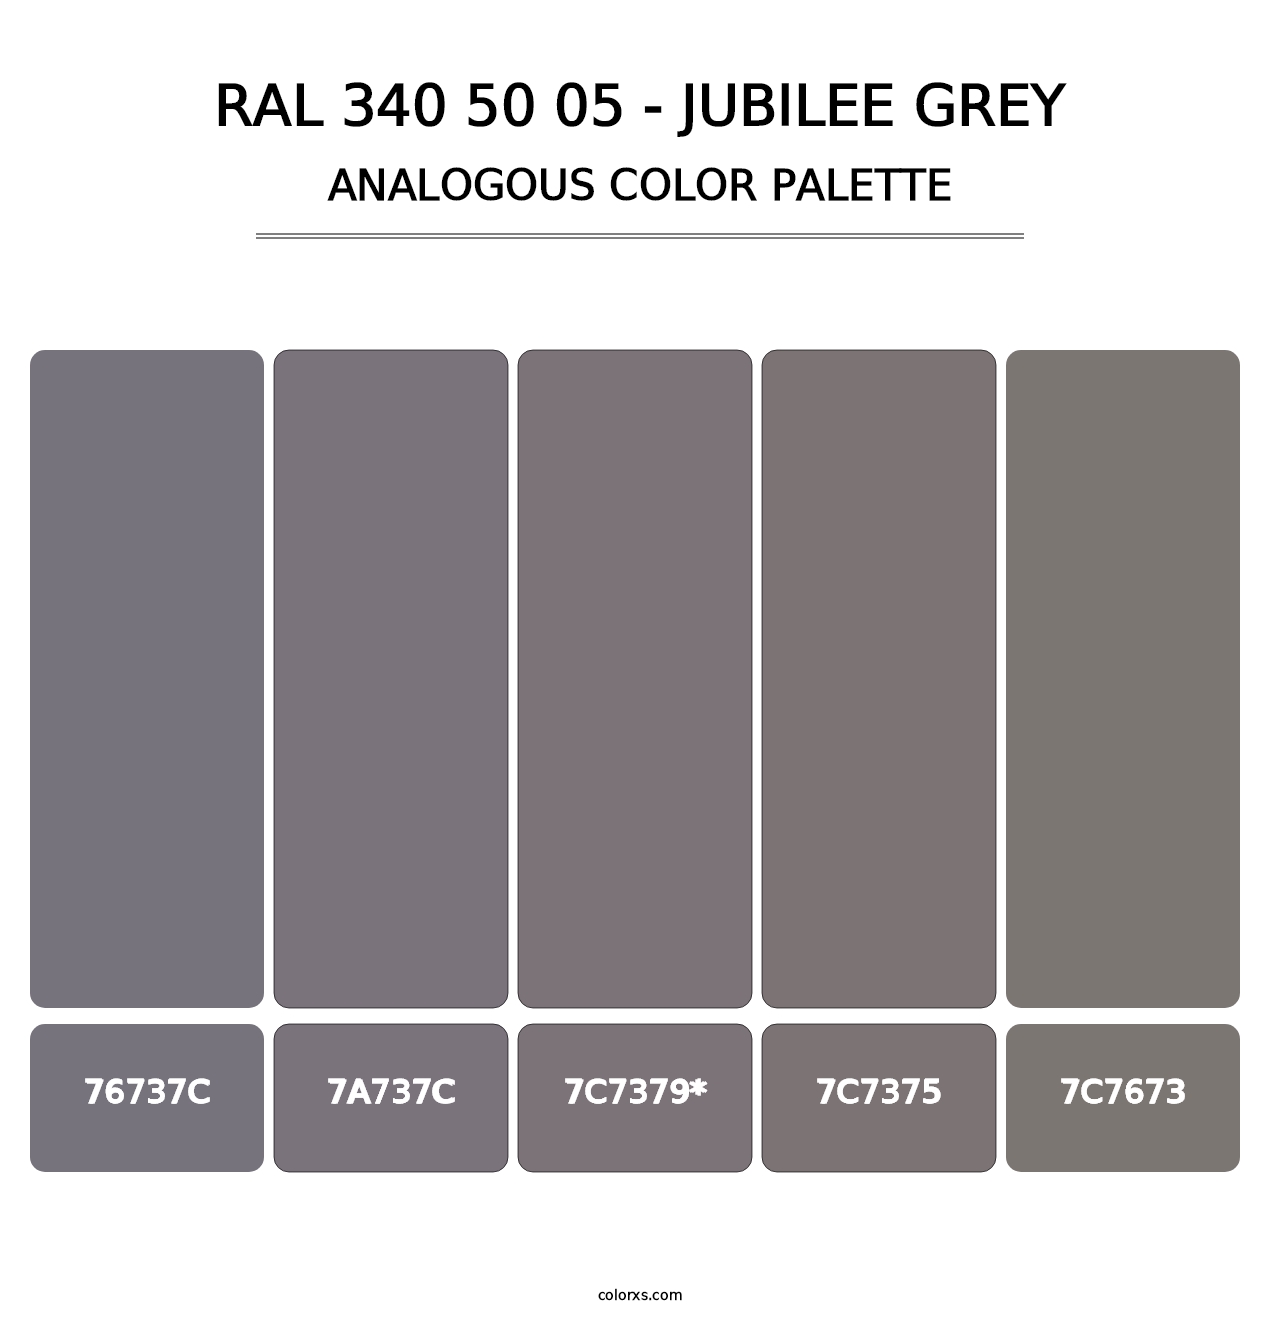 RAL 340 50 05 - Jubilee Grey - Analogous Color Palette